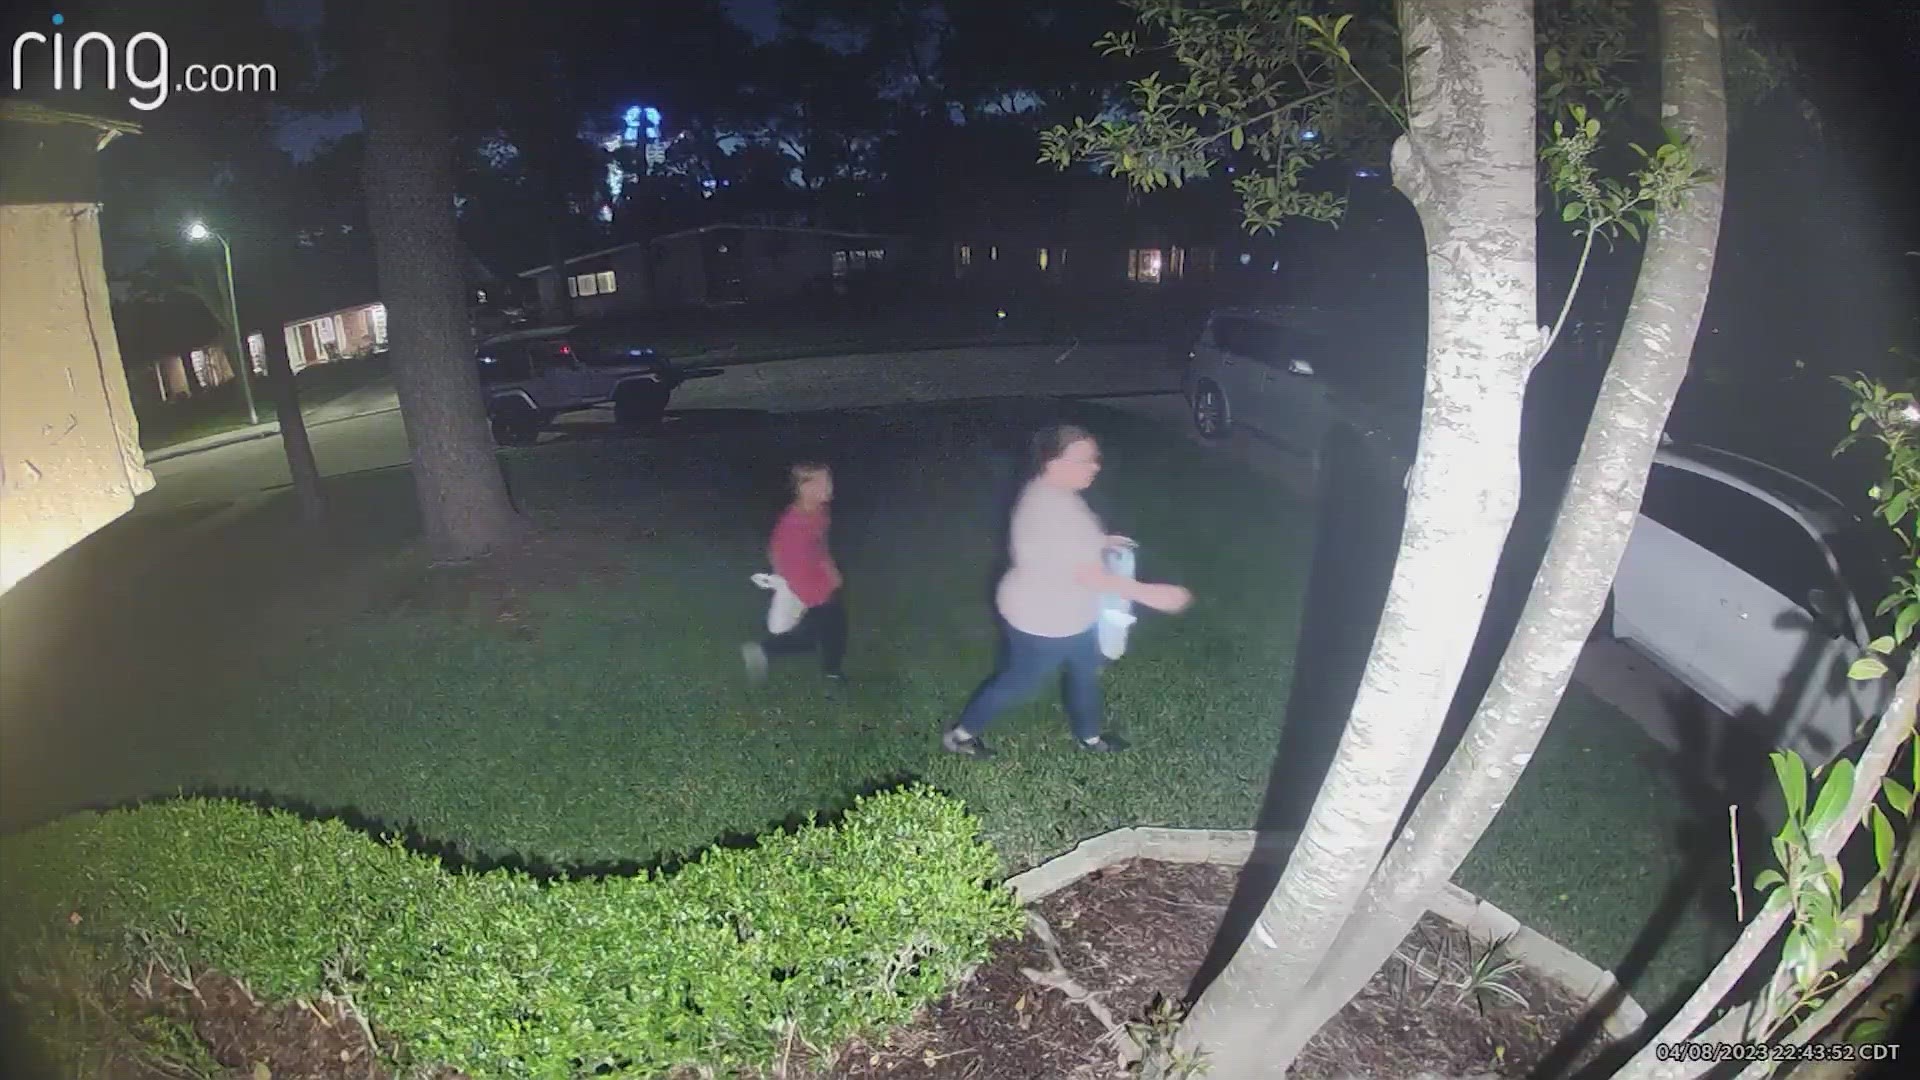 Caught on camera: Neighbors hide Easter eggs at wrong Texas home